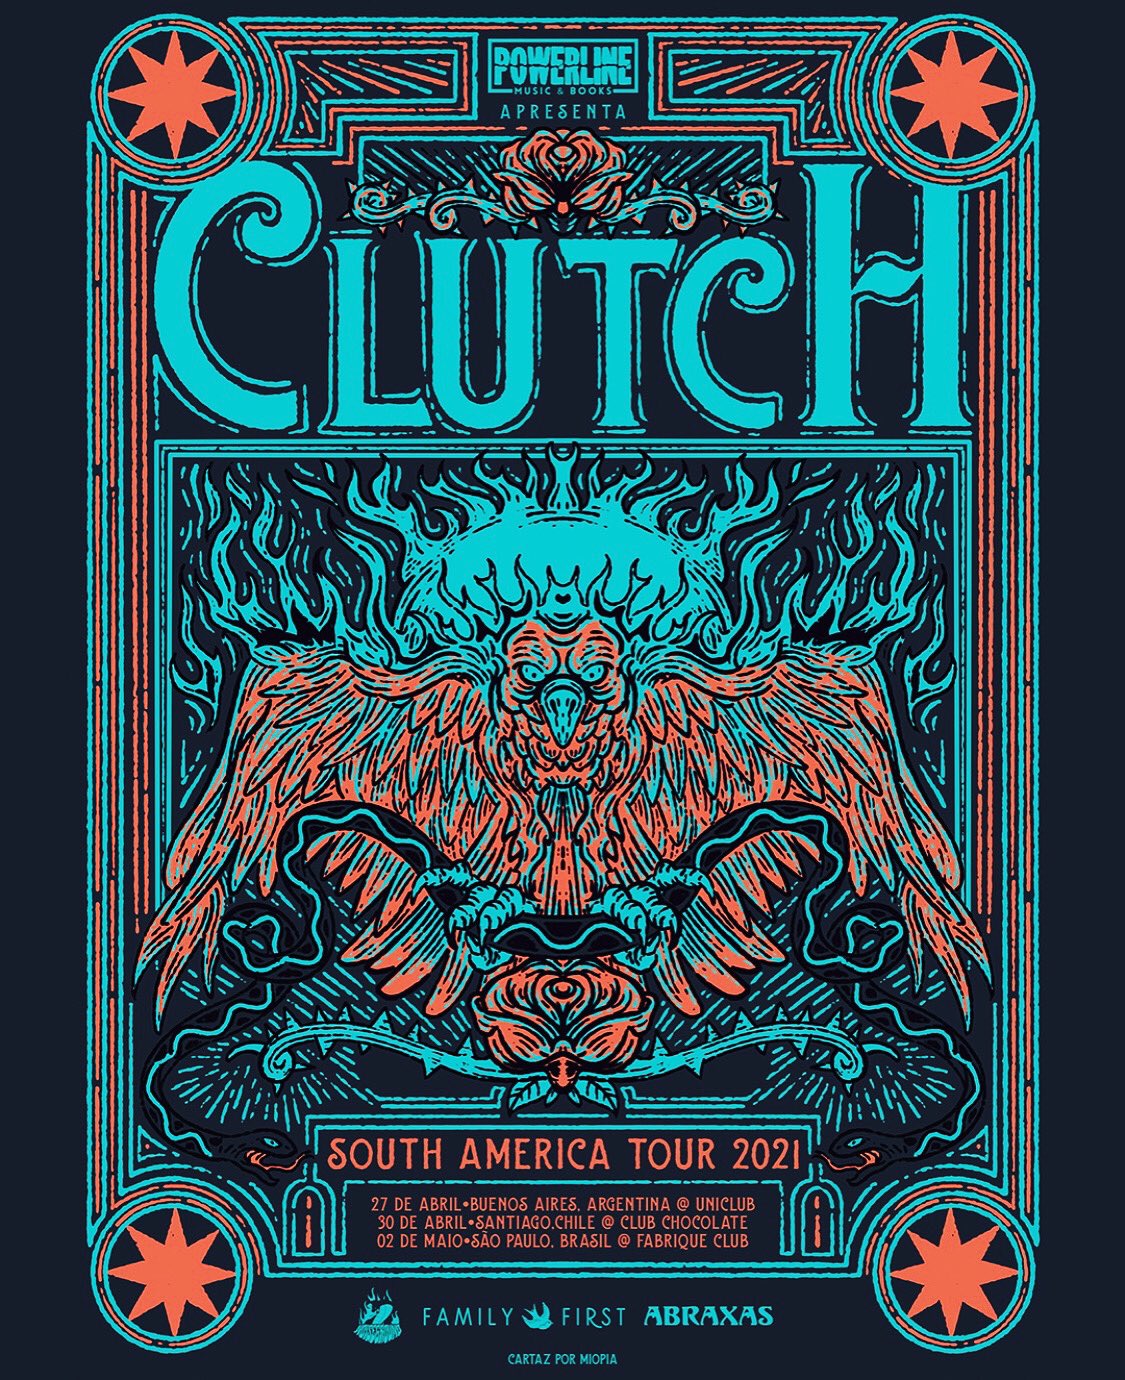 Clutch're happy to announce that our South American shows have been rescheduled for 2021. April 27 Aires, Argentina Uniclub April 30, Chile Club